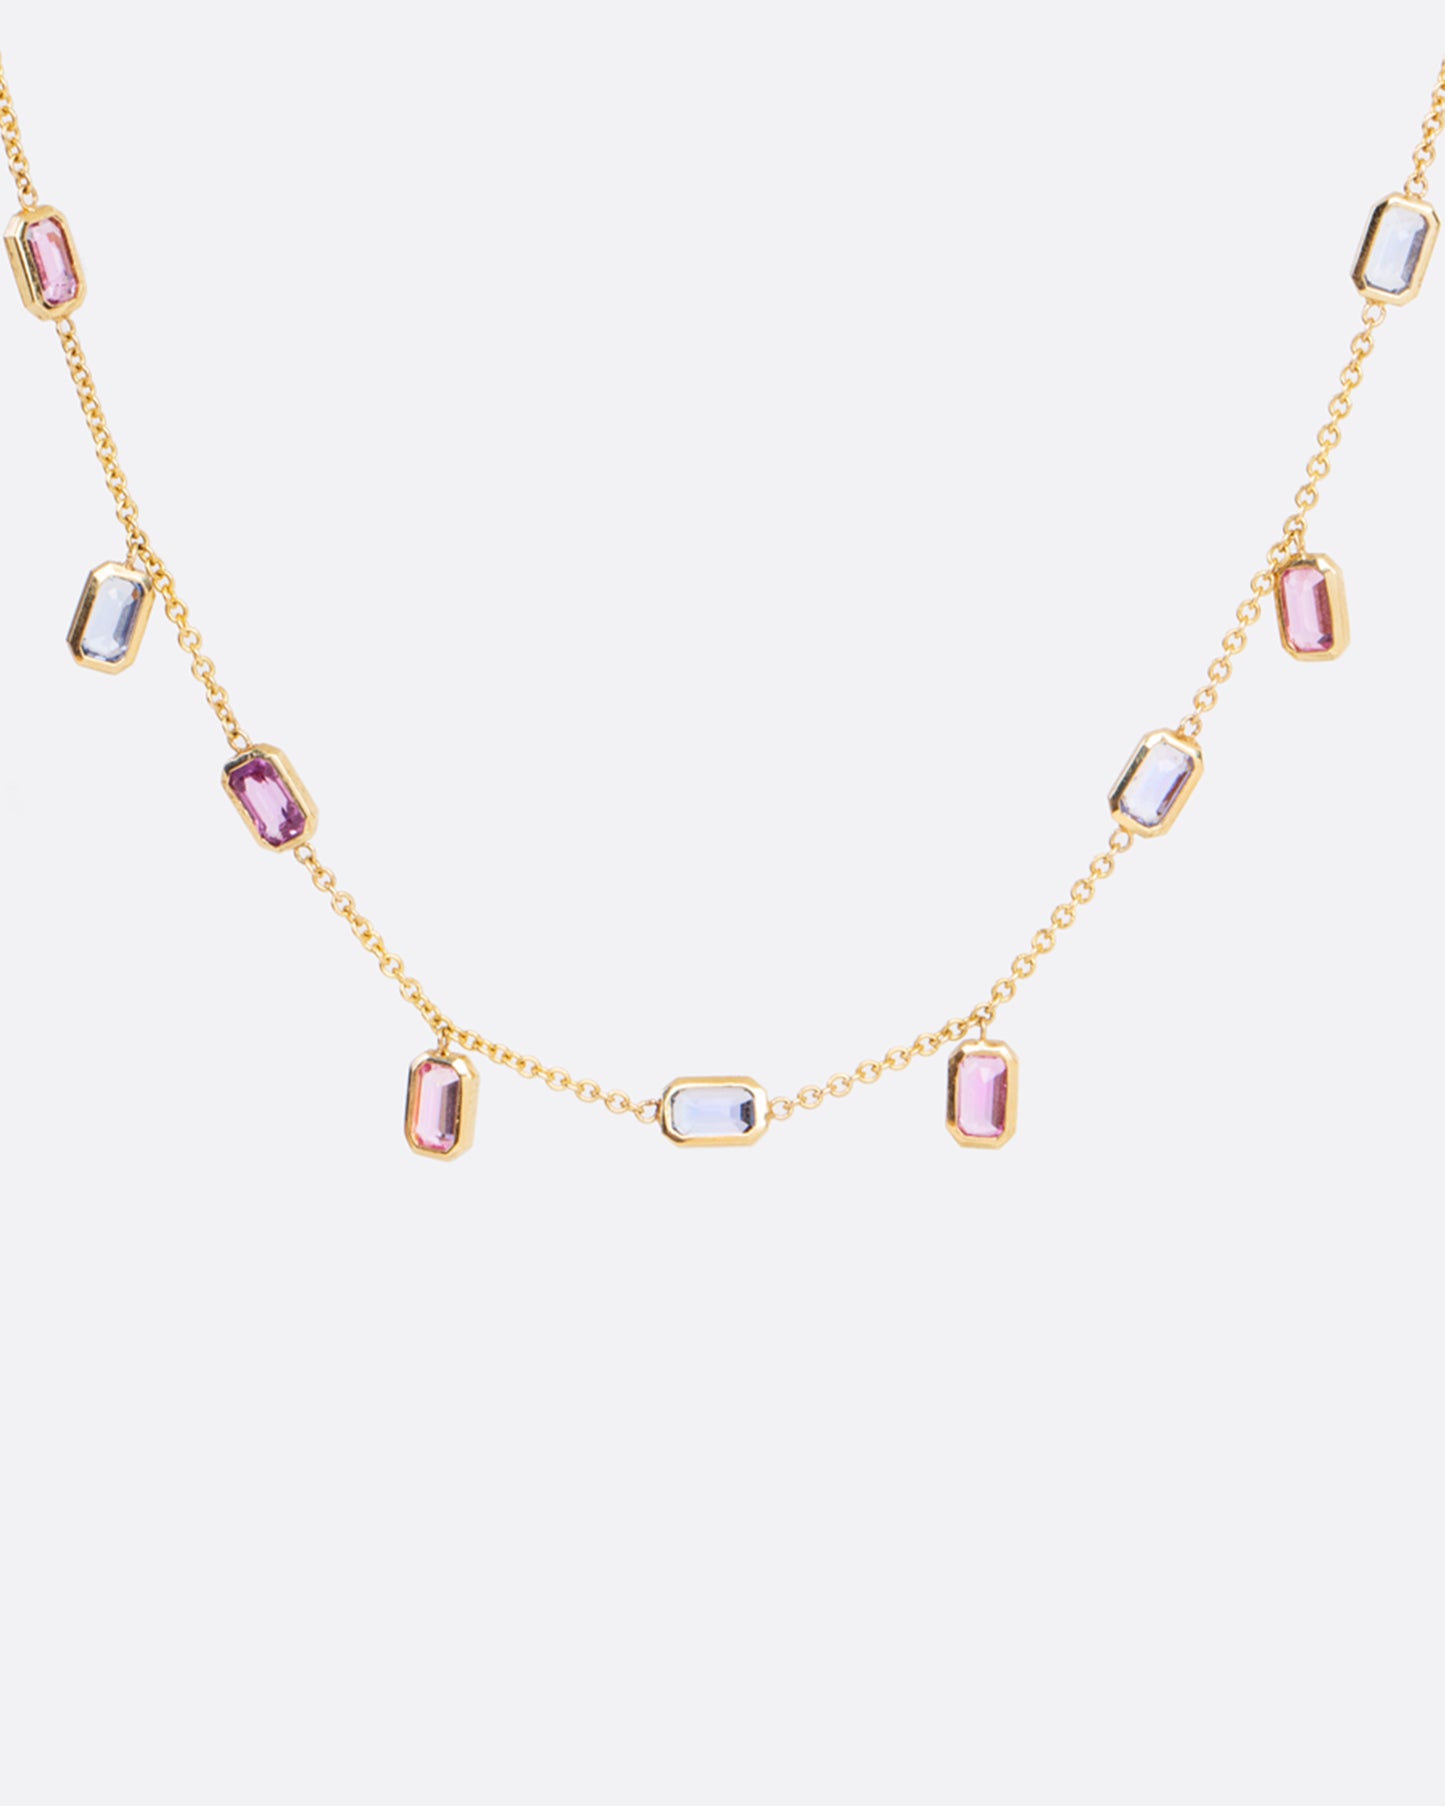 A chain necklace with alternating fixed and floating bezel set sapphires. With a mix of sapphire colors this necklace is fun with a touch of elegant.